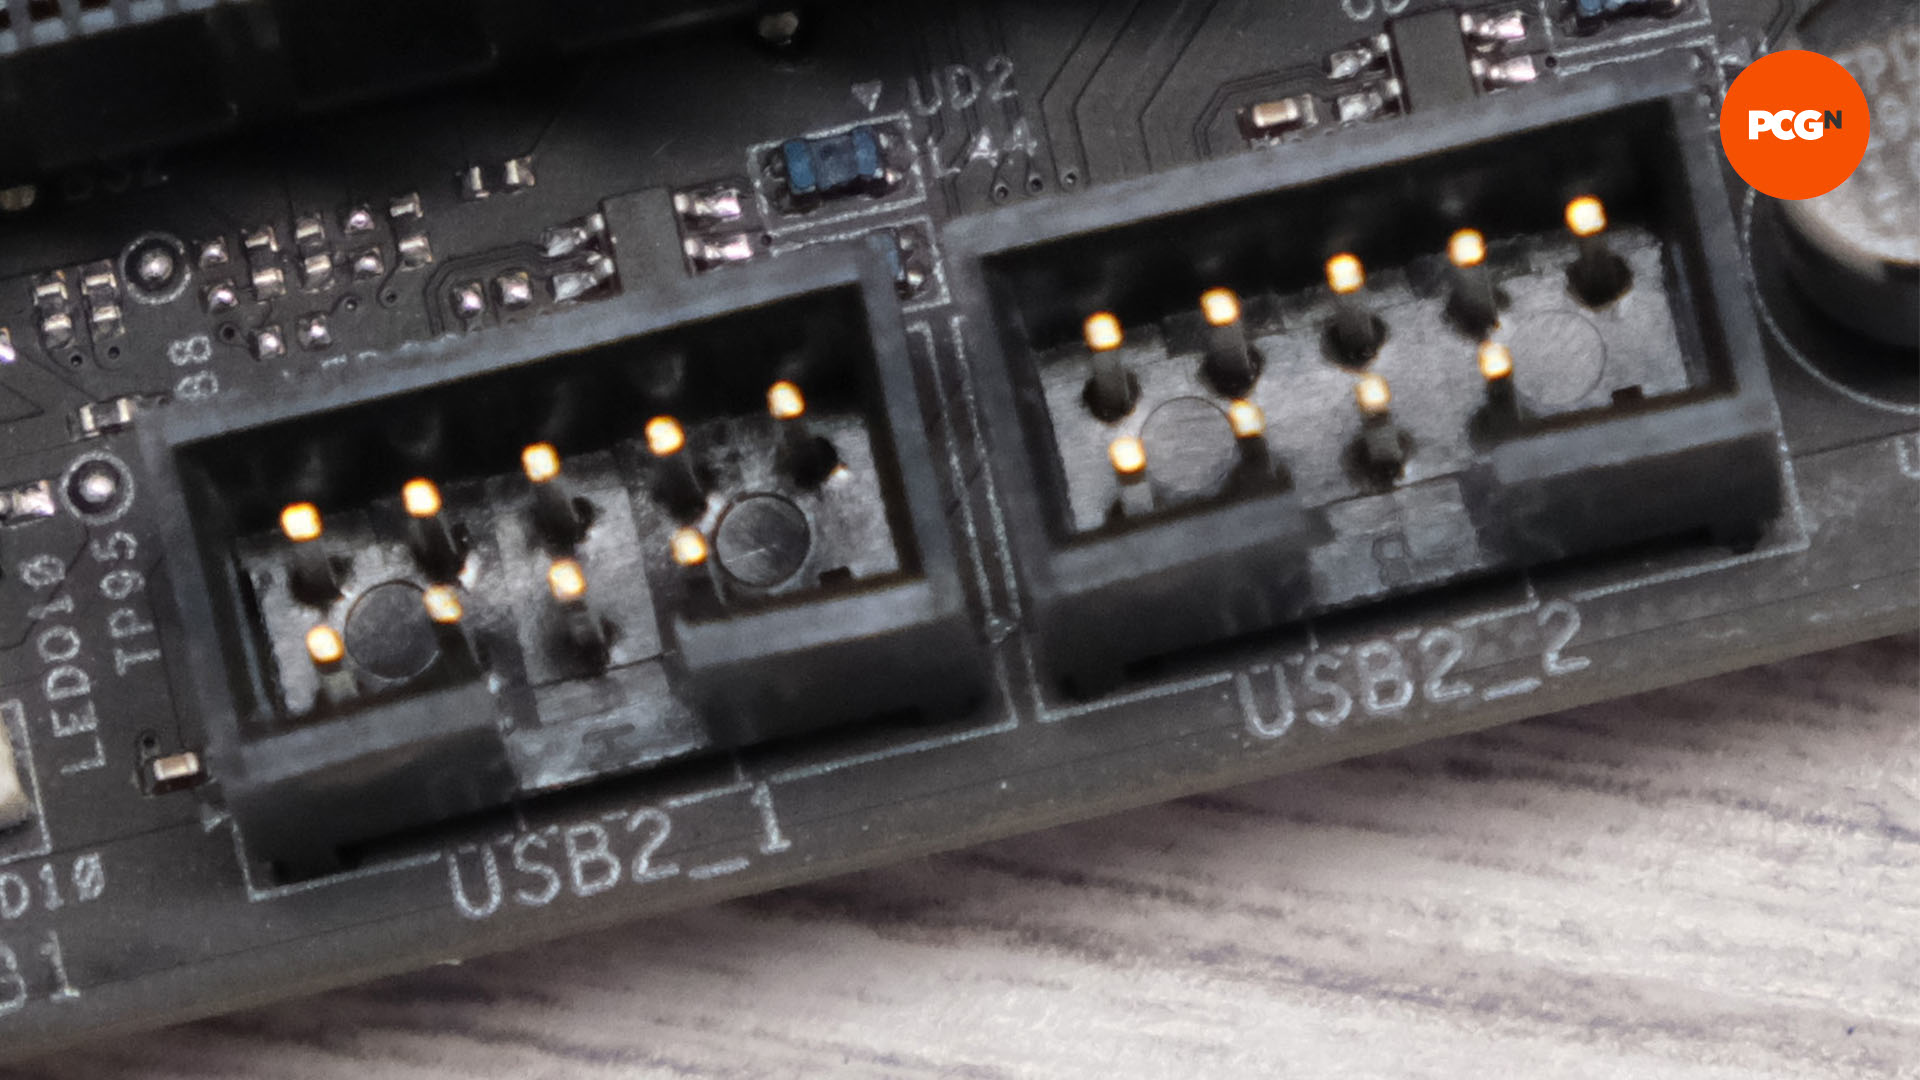 The USB 2 socket on a motherboard